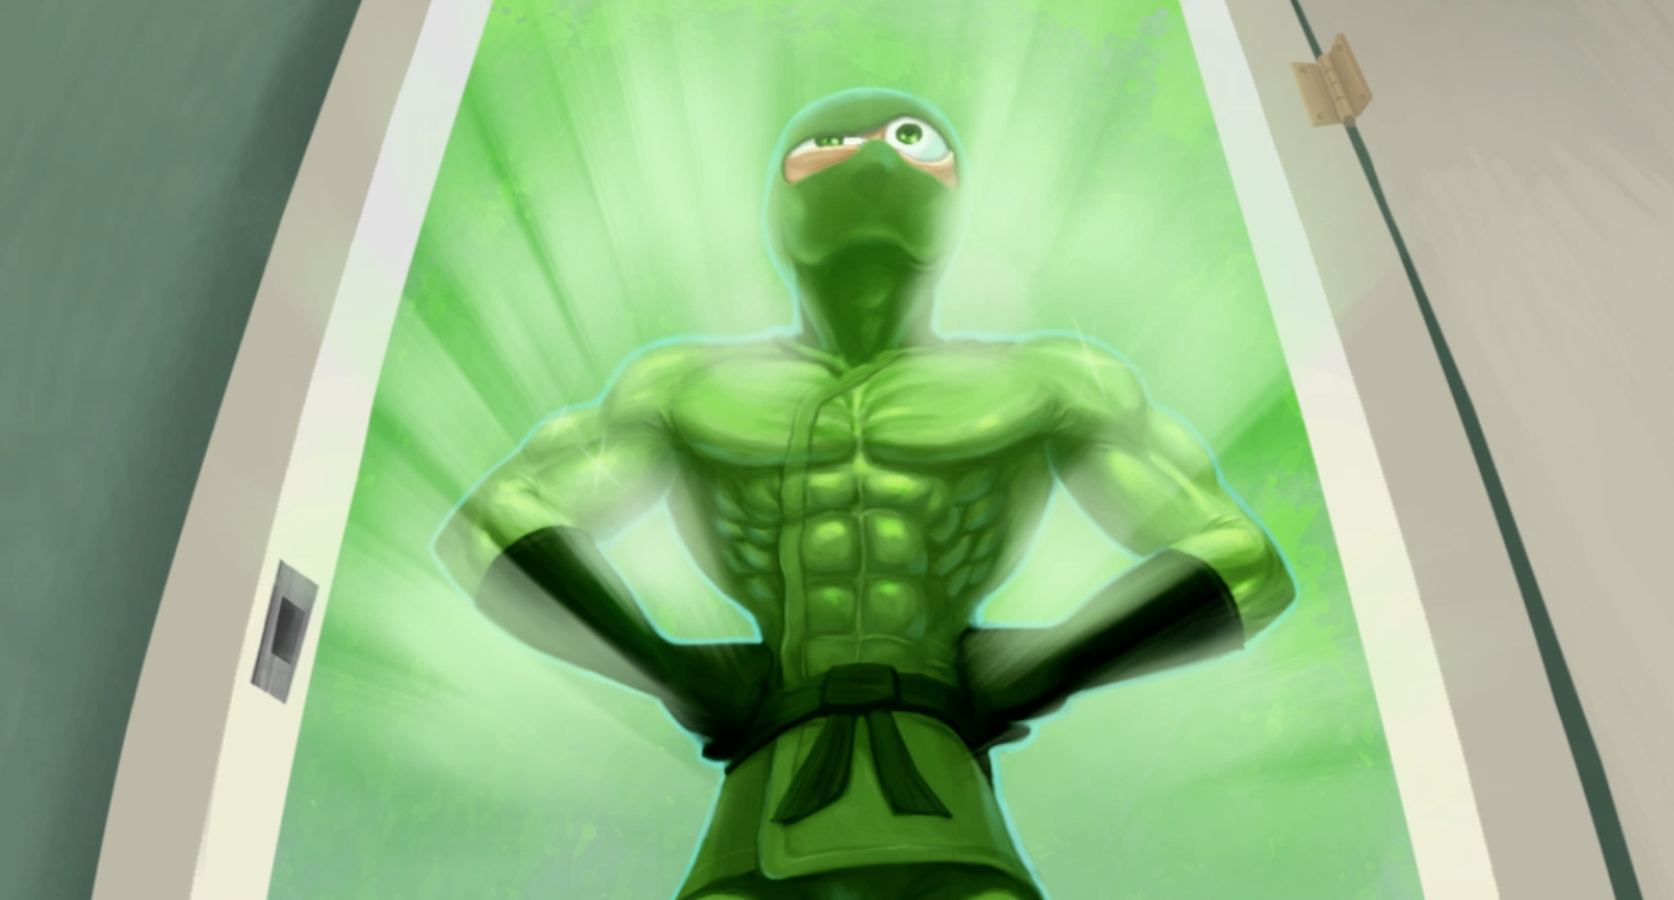 The Green Ninja, an animated green frog like character stands with his hands on on hps in the middle of a door way, wearing black long gloves and a ninja belt. Green light shines behind him.